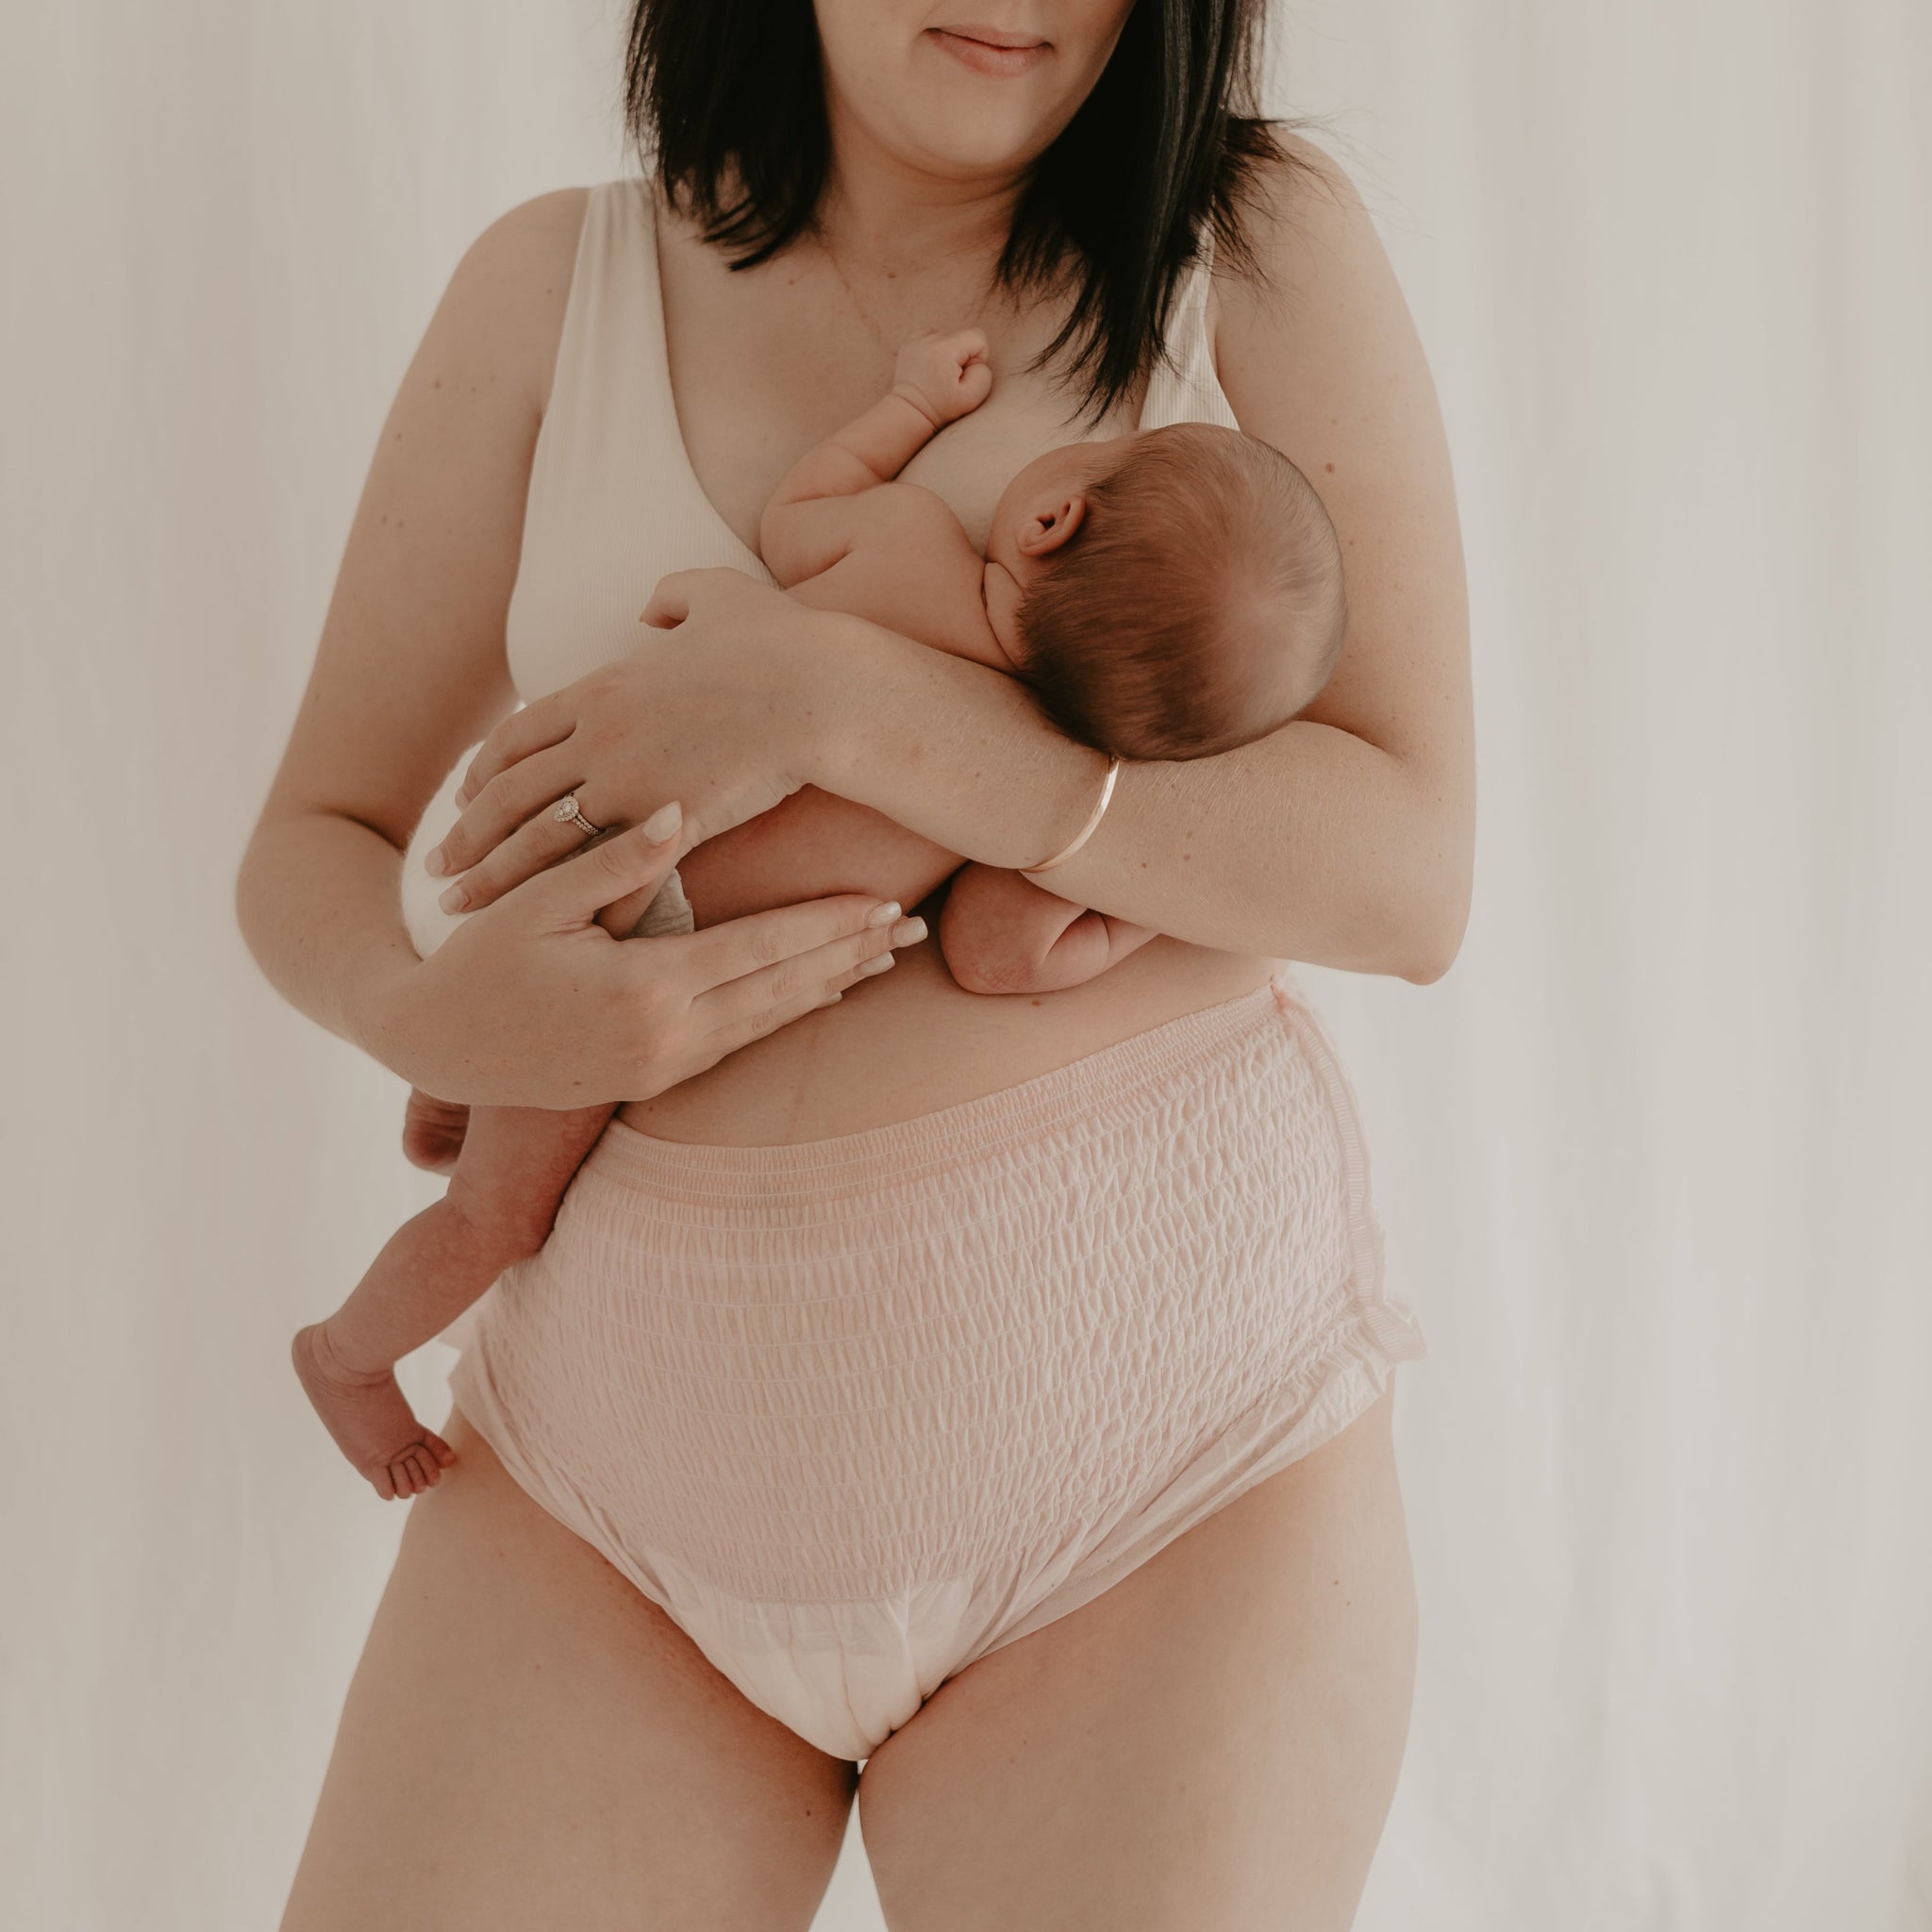 Why you need disposable underwear after giving birth. – AltroCare